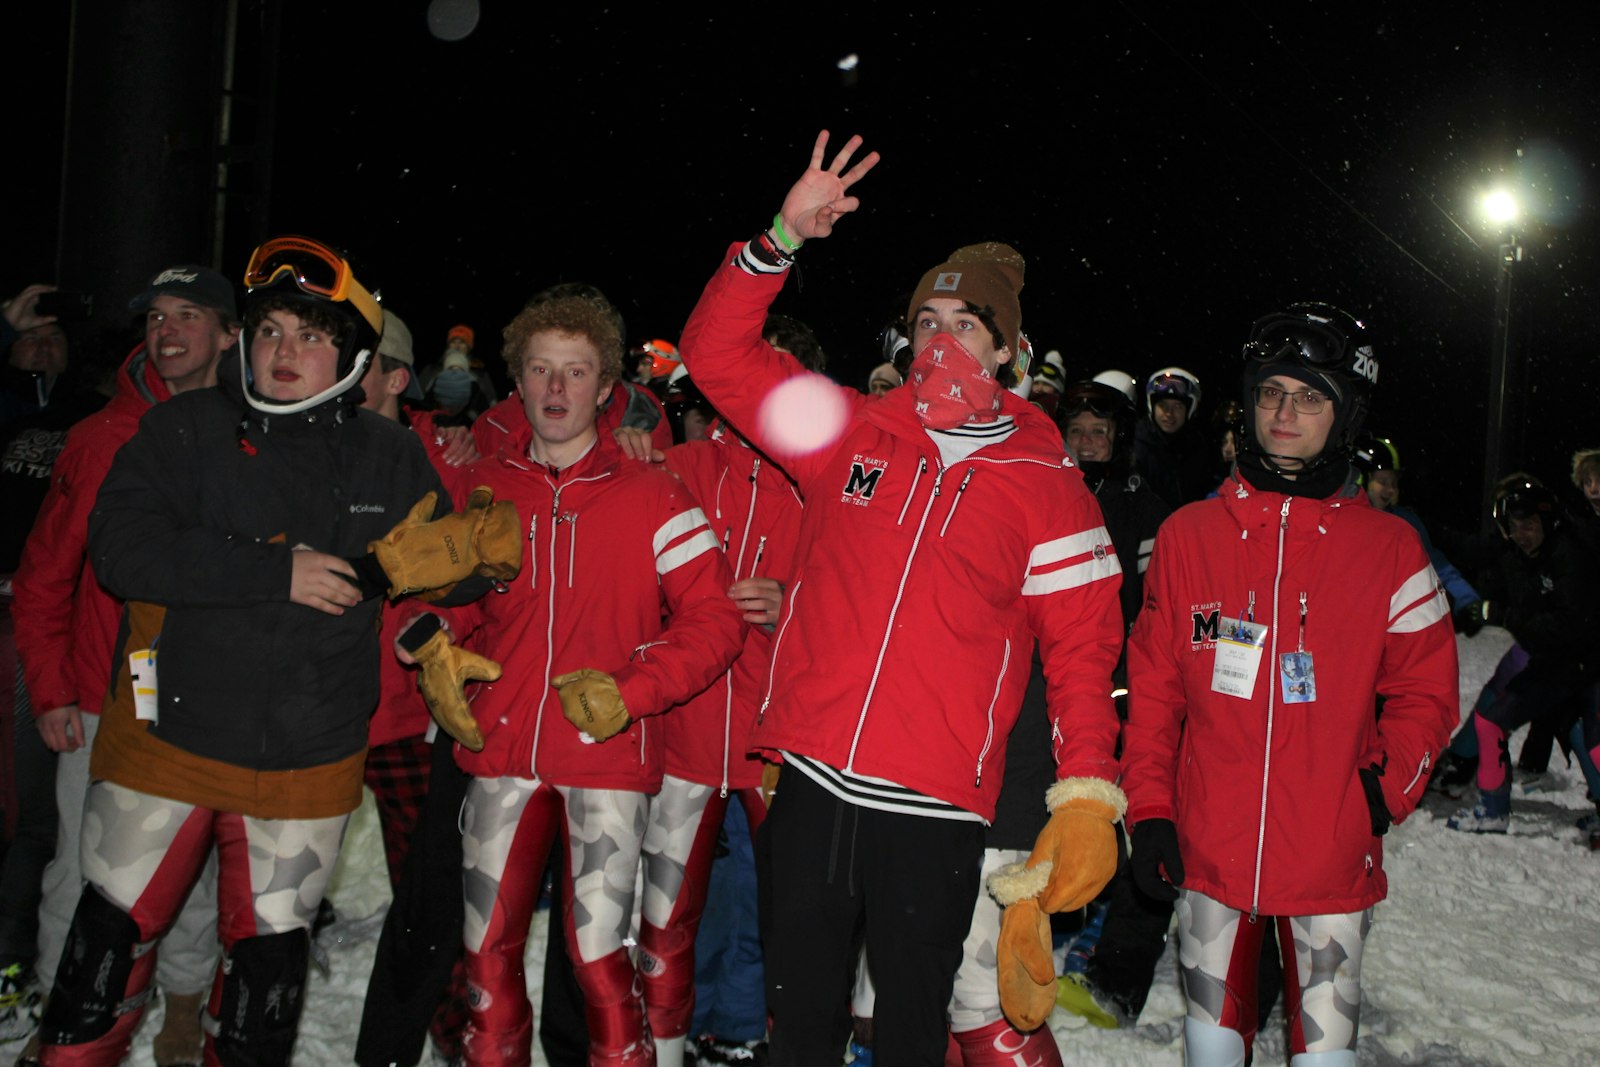 Orchard Lake St. Mary’s skiers react with elation after the final team scores are announced, giving the Eaglets the Catholic League ski championship for the third winter in a row.